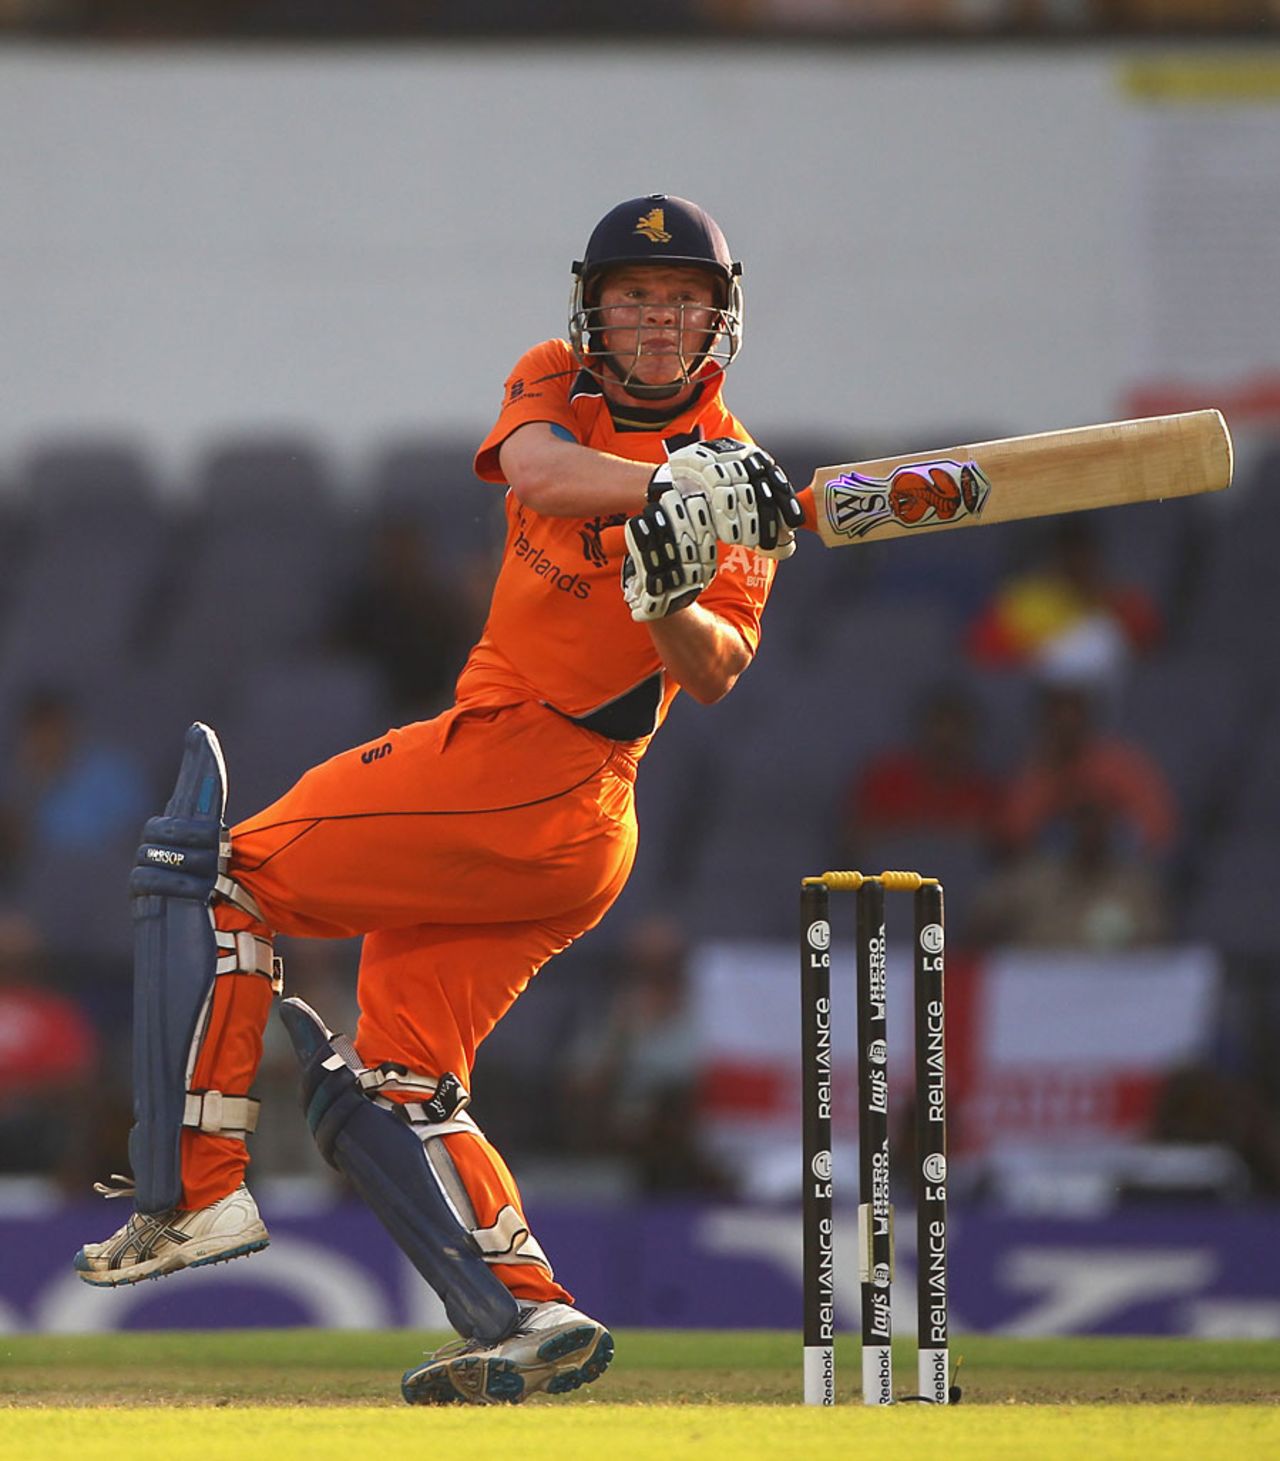 Tom de Grooth provided valuable impetus for Netherlands, England v Netherlands, Group B, World Cup, Nagpur, February 22, 2011